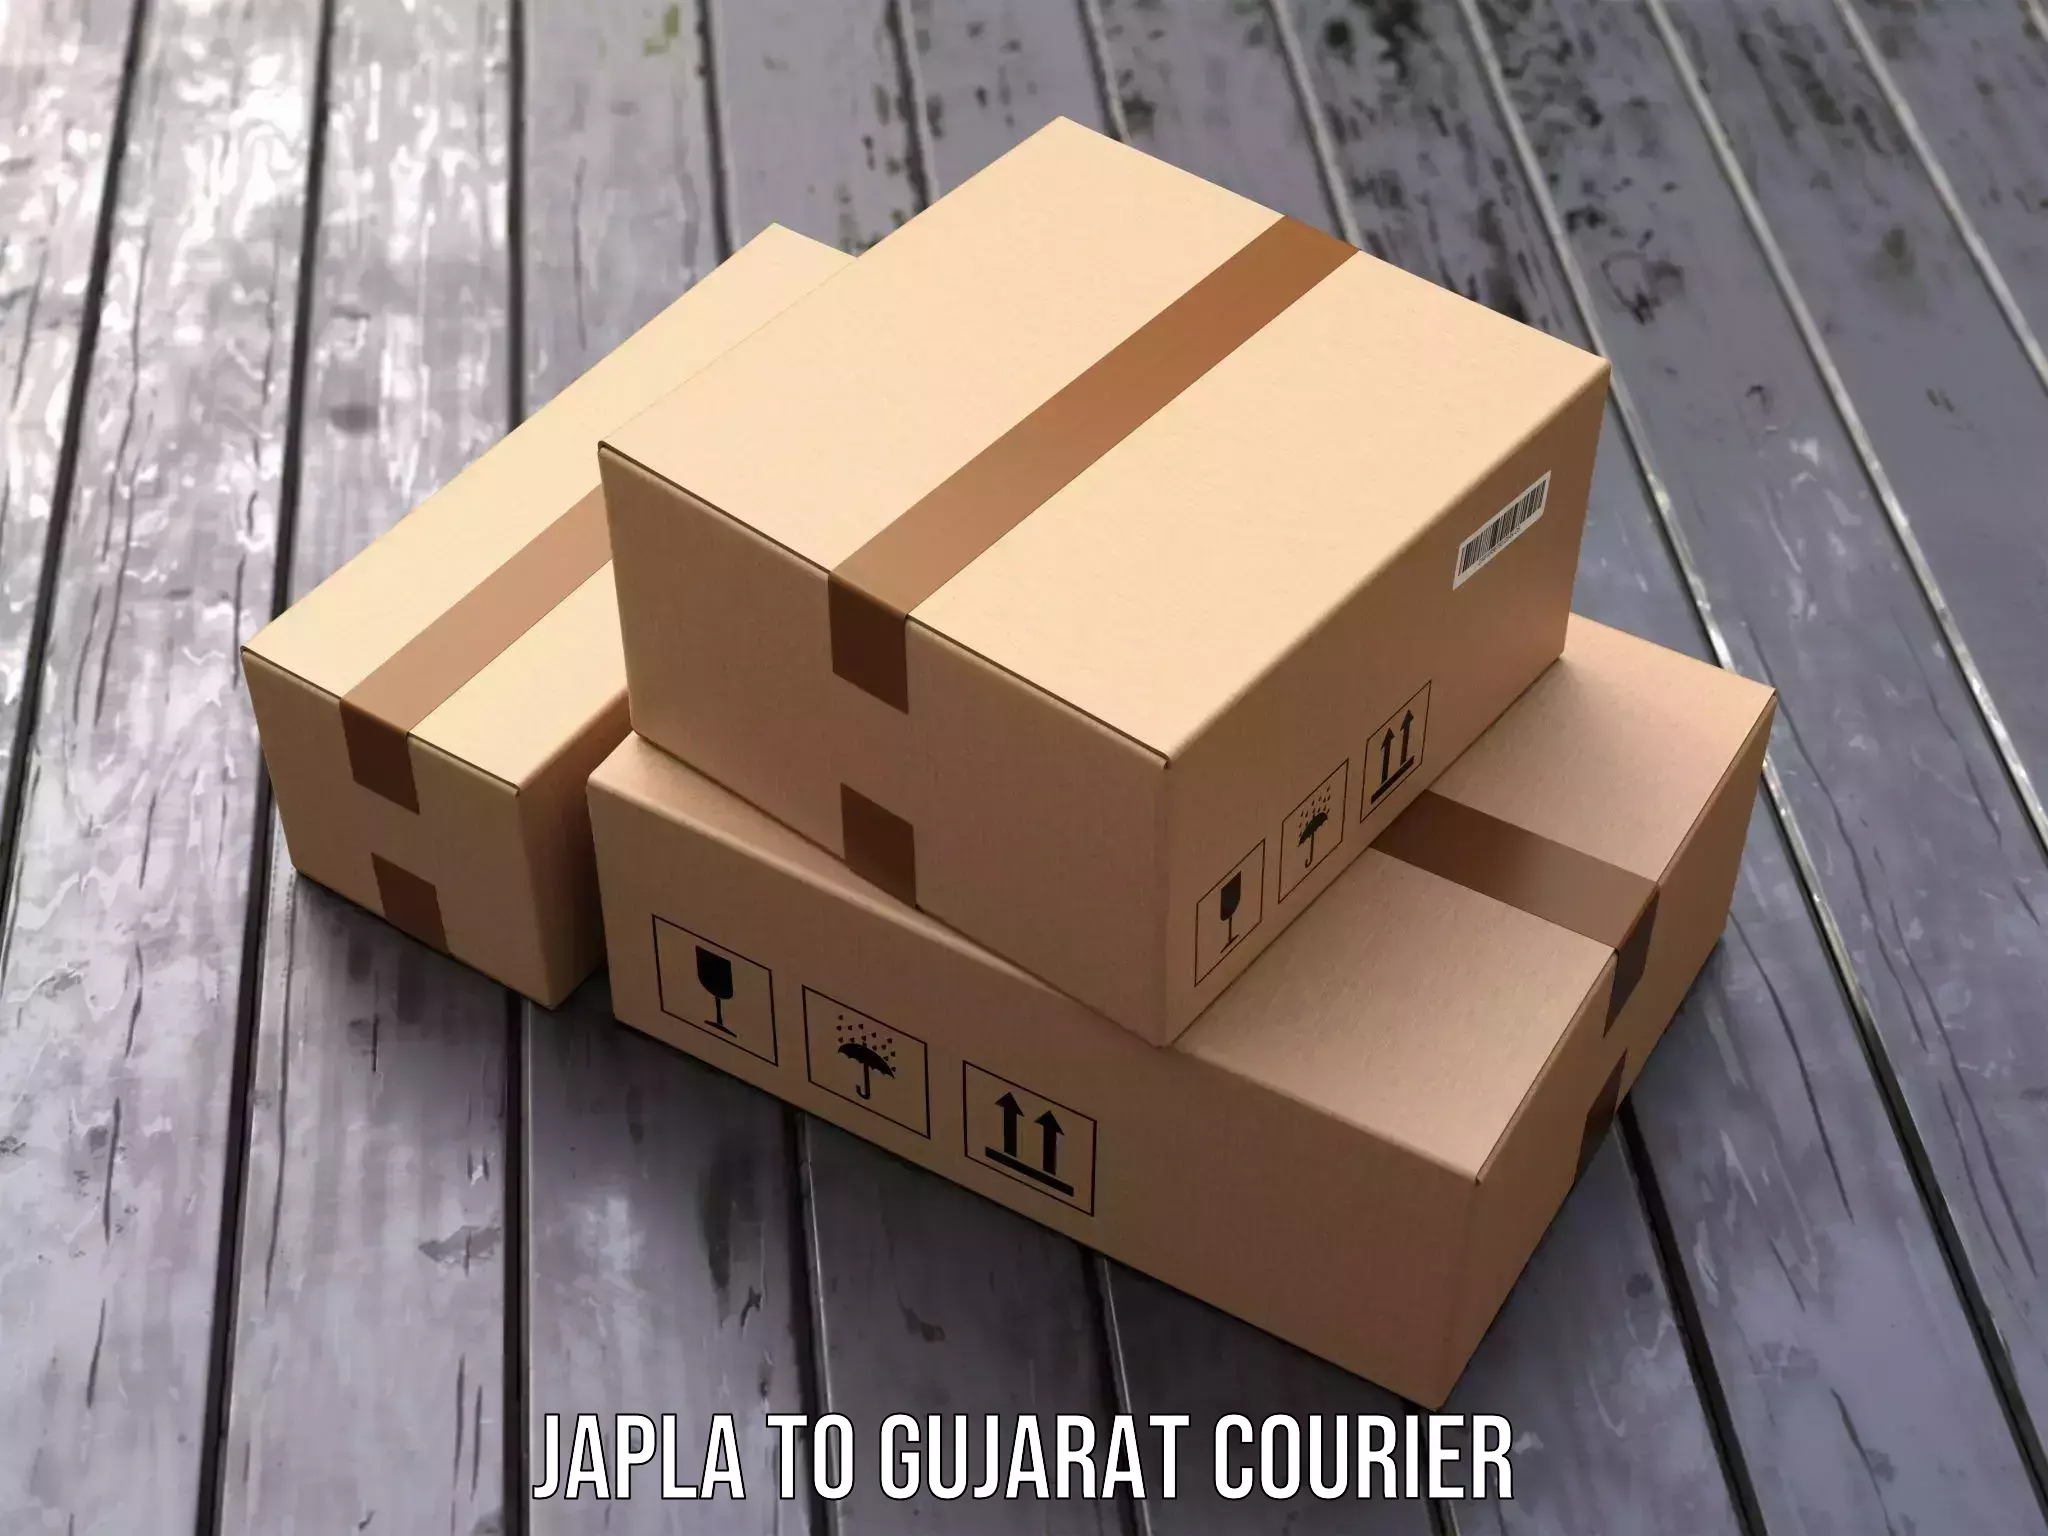 On-demand shipping options Japla to Gujarat